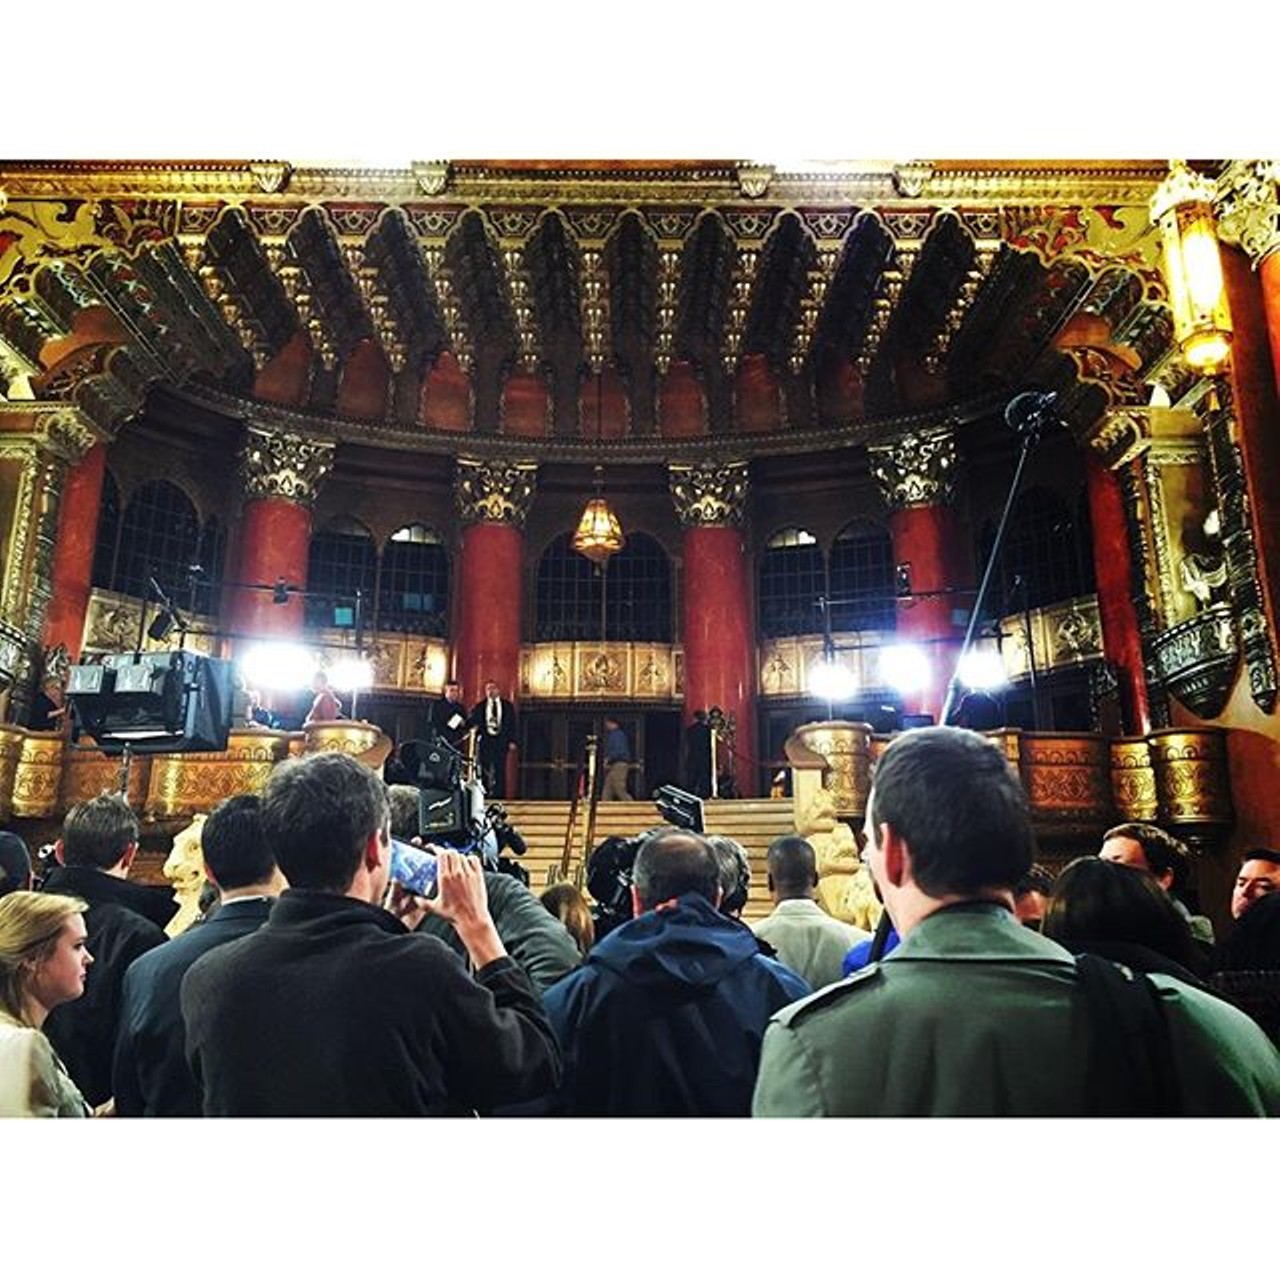 Inside, media gathered in the grand lobby of the Fox Theatre to await the candidates.
Photo via Instagram user @Eenafefe